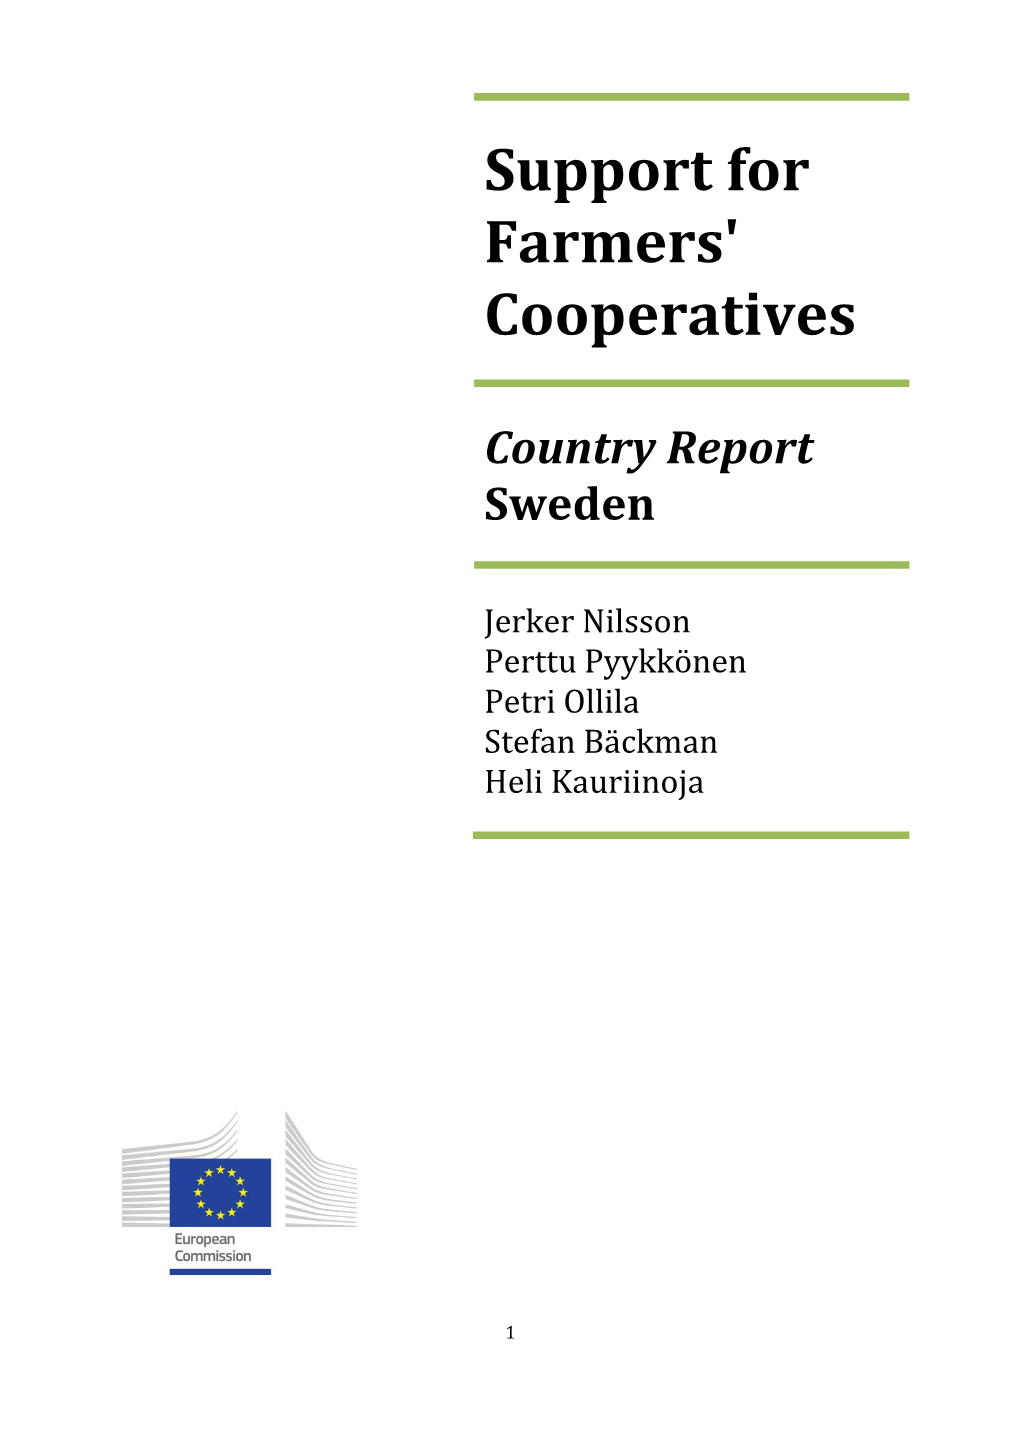 Support for Farmers' Cooperatives Country Report Sweden